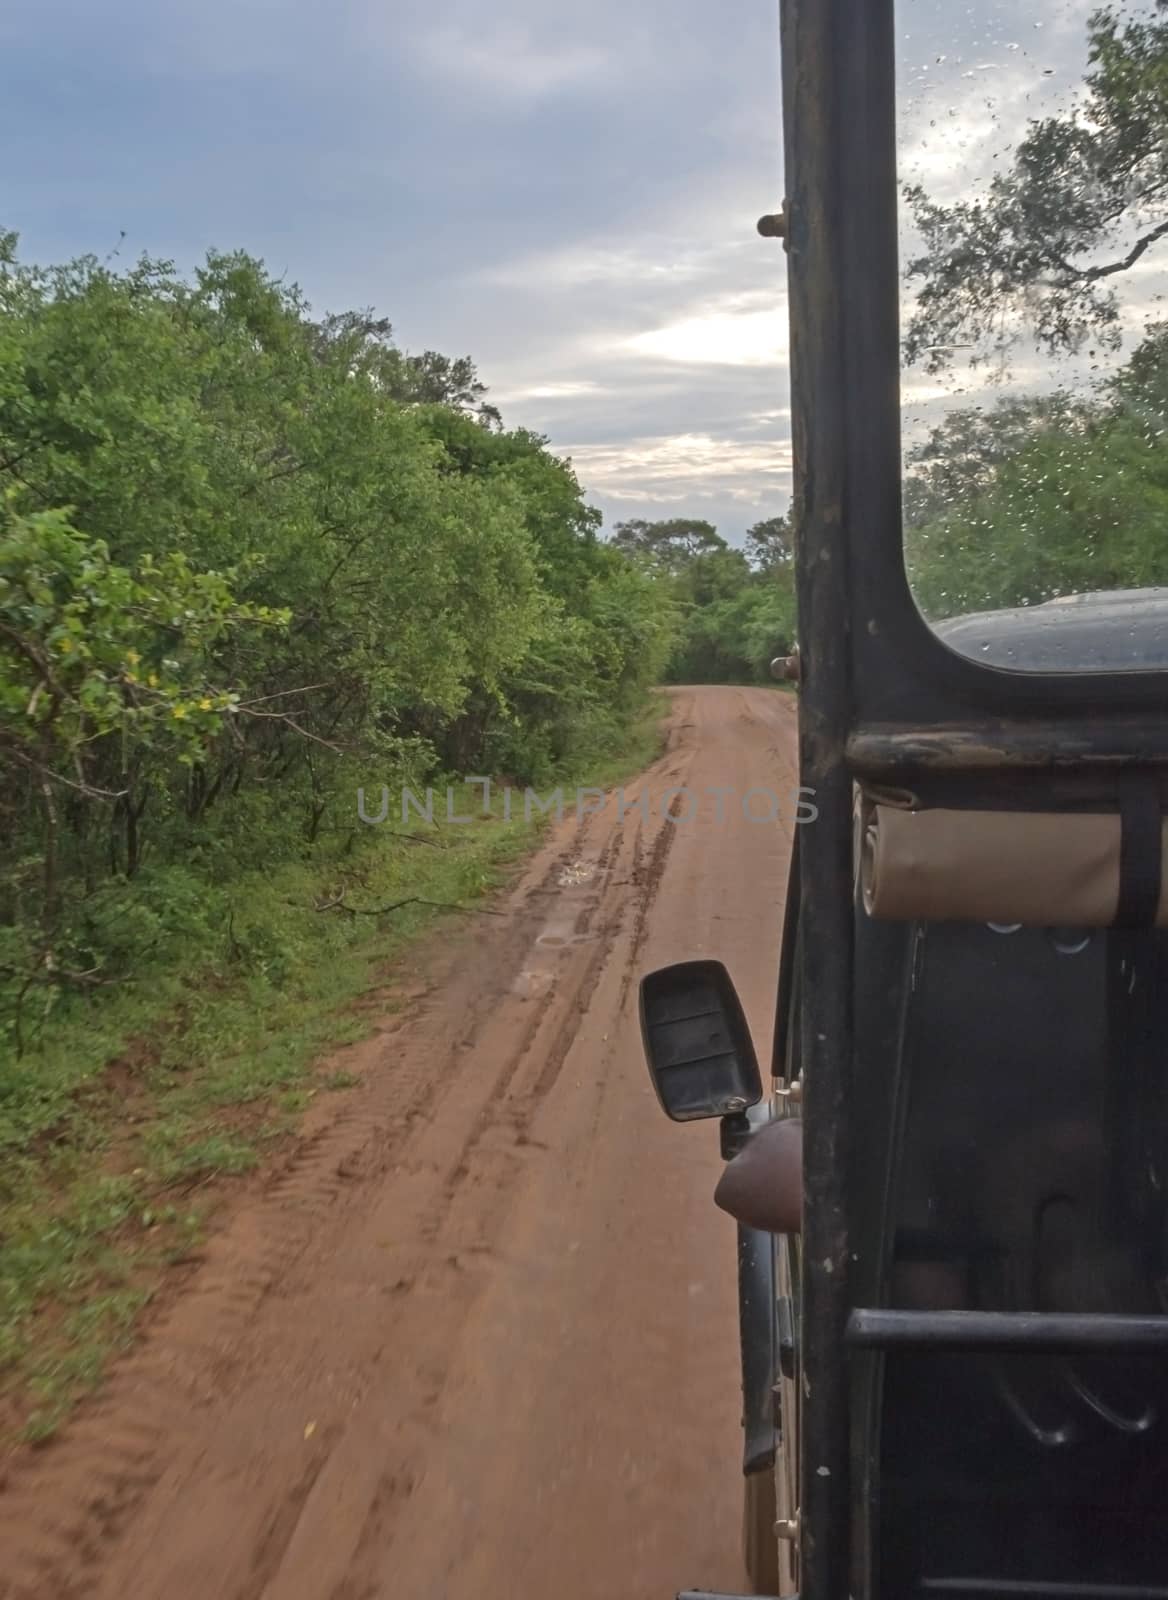 Red dirt road from inside safari jeep by ArtesiaWells